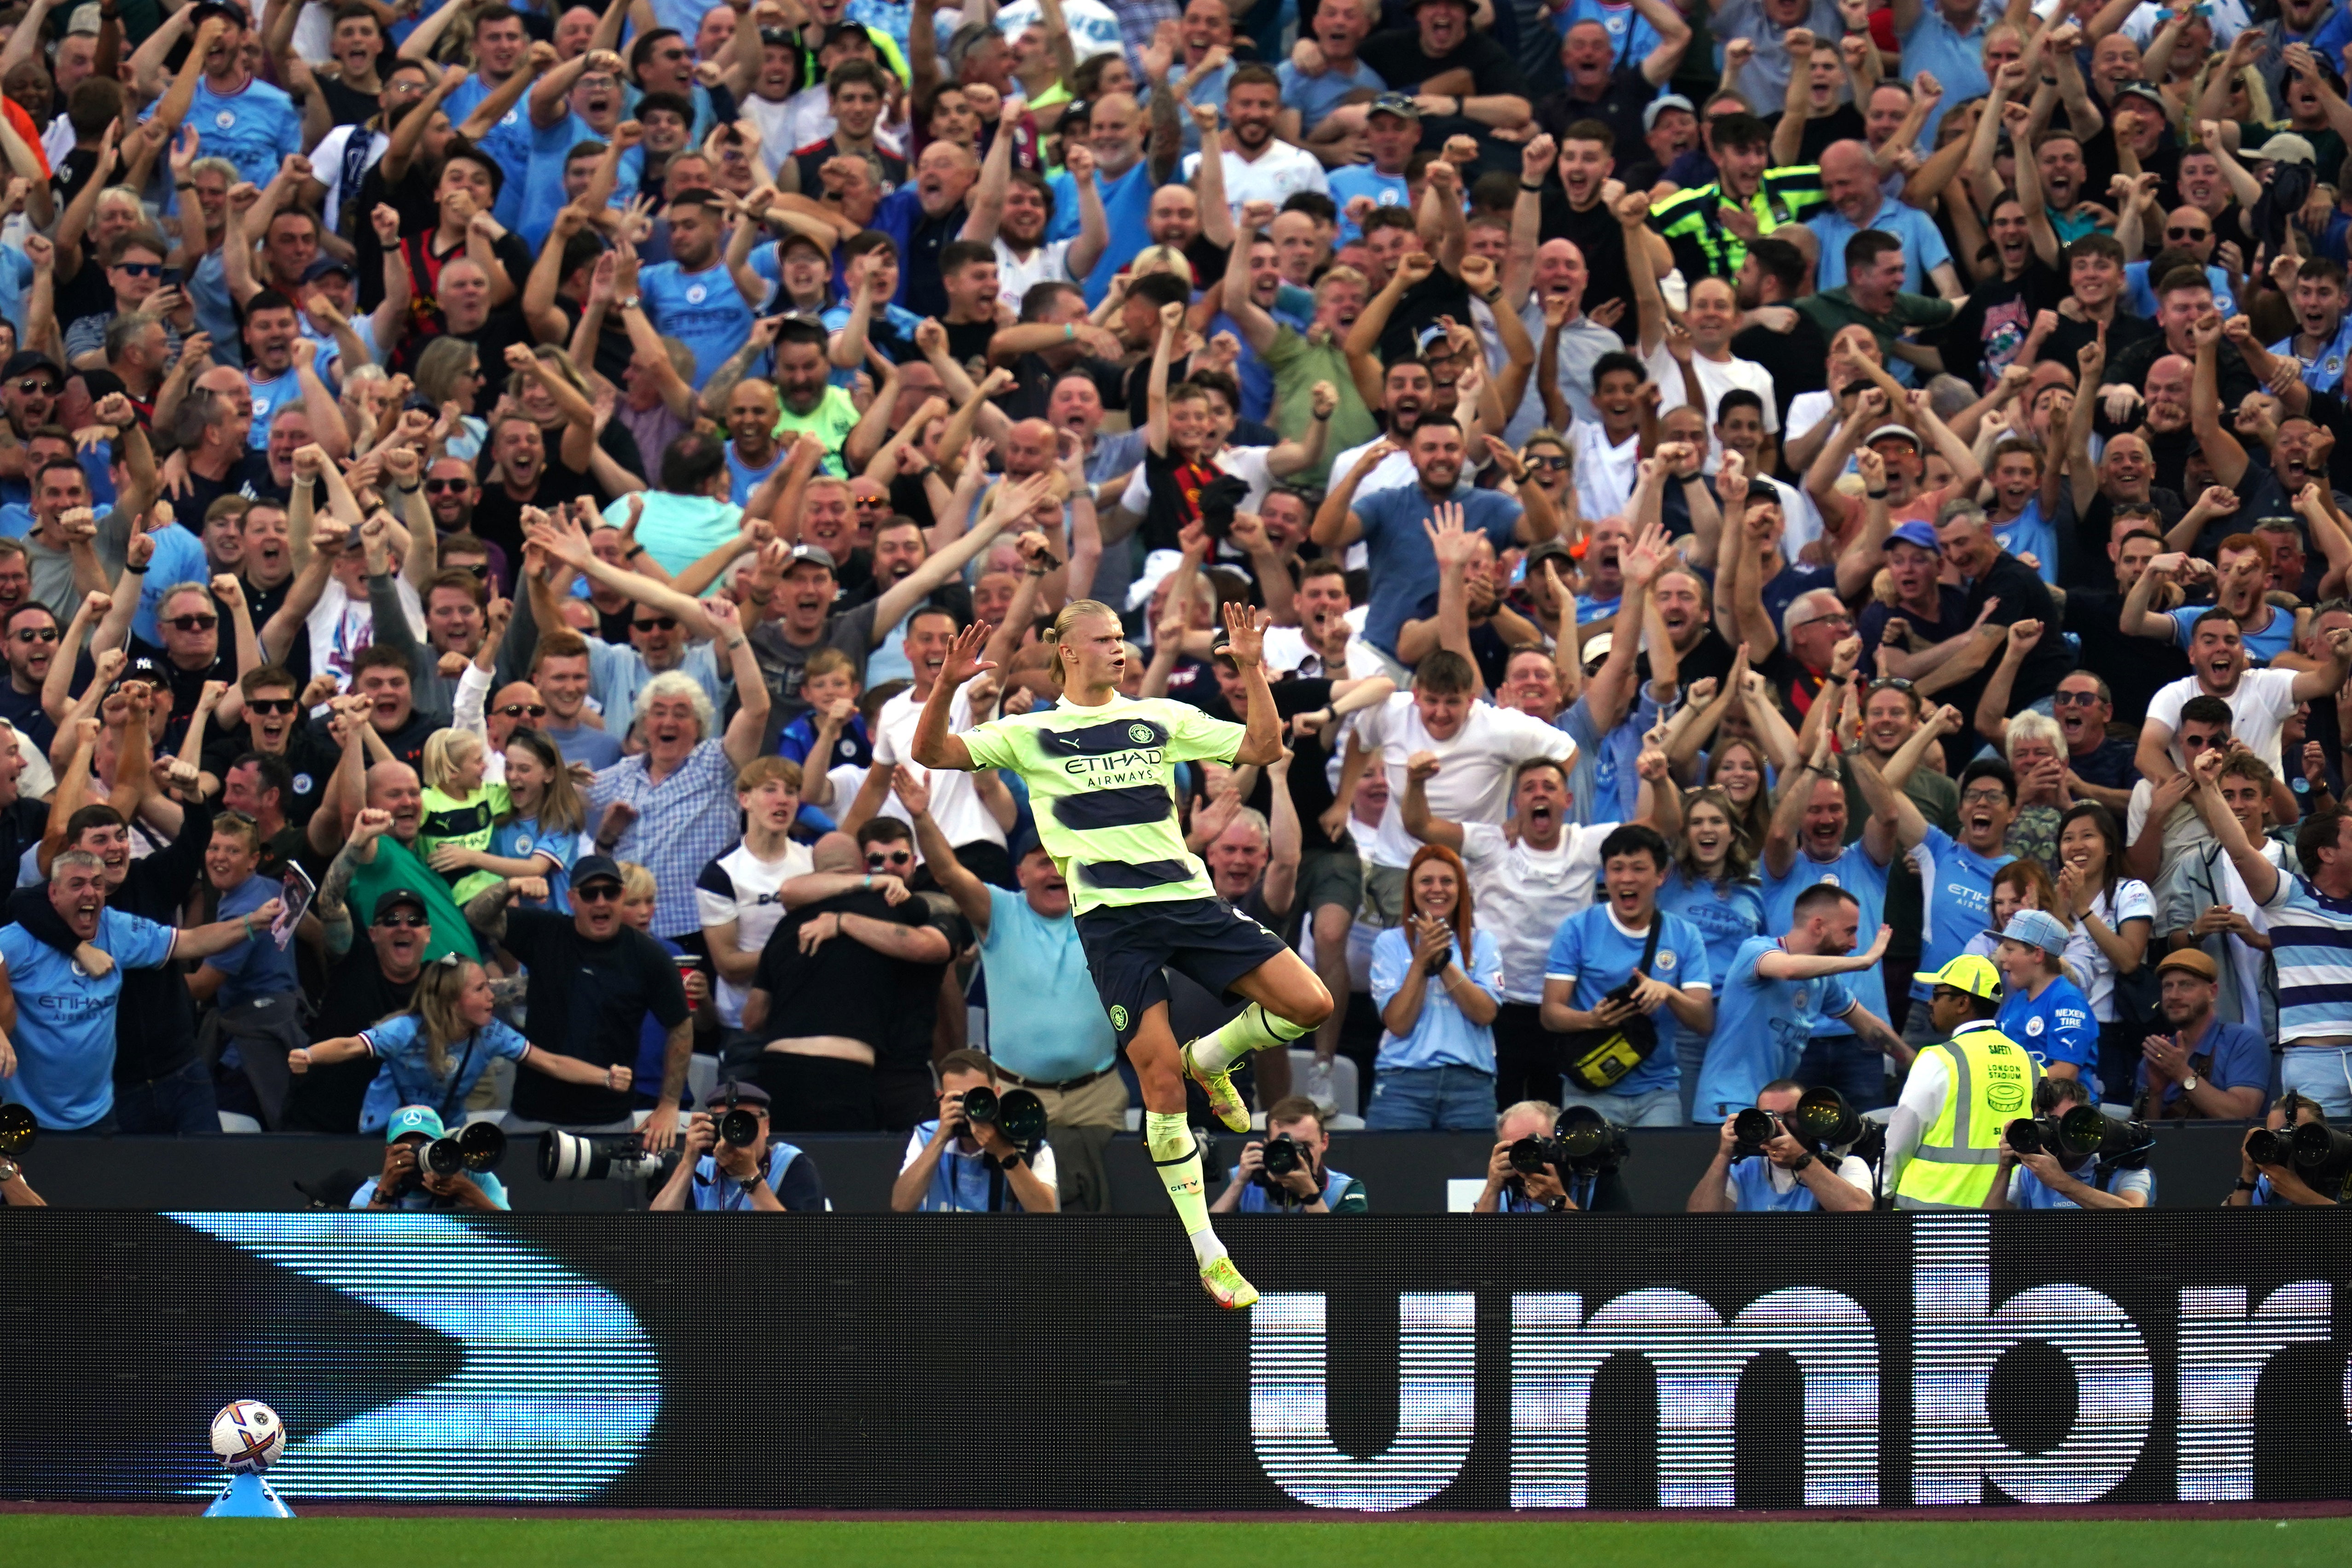 Erling Haaland celebrates after scoring his first goals in the Premier League on his league debut for Manchester City(John Walton/PA)